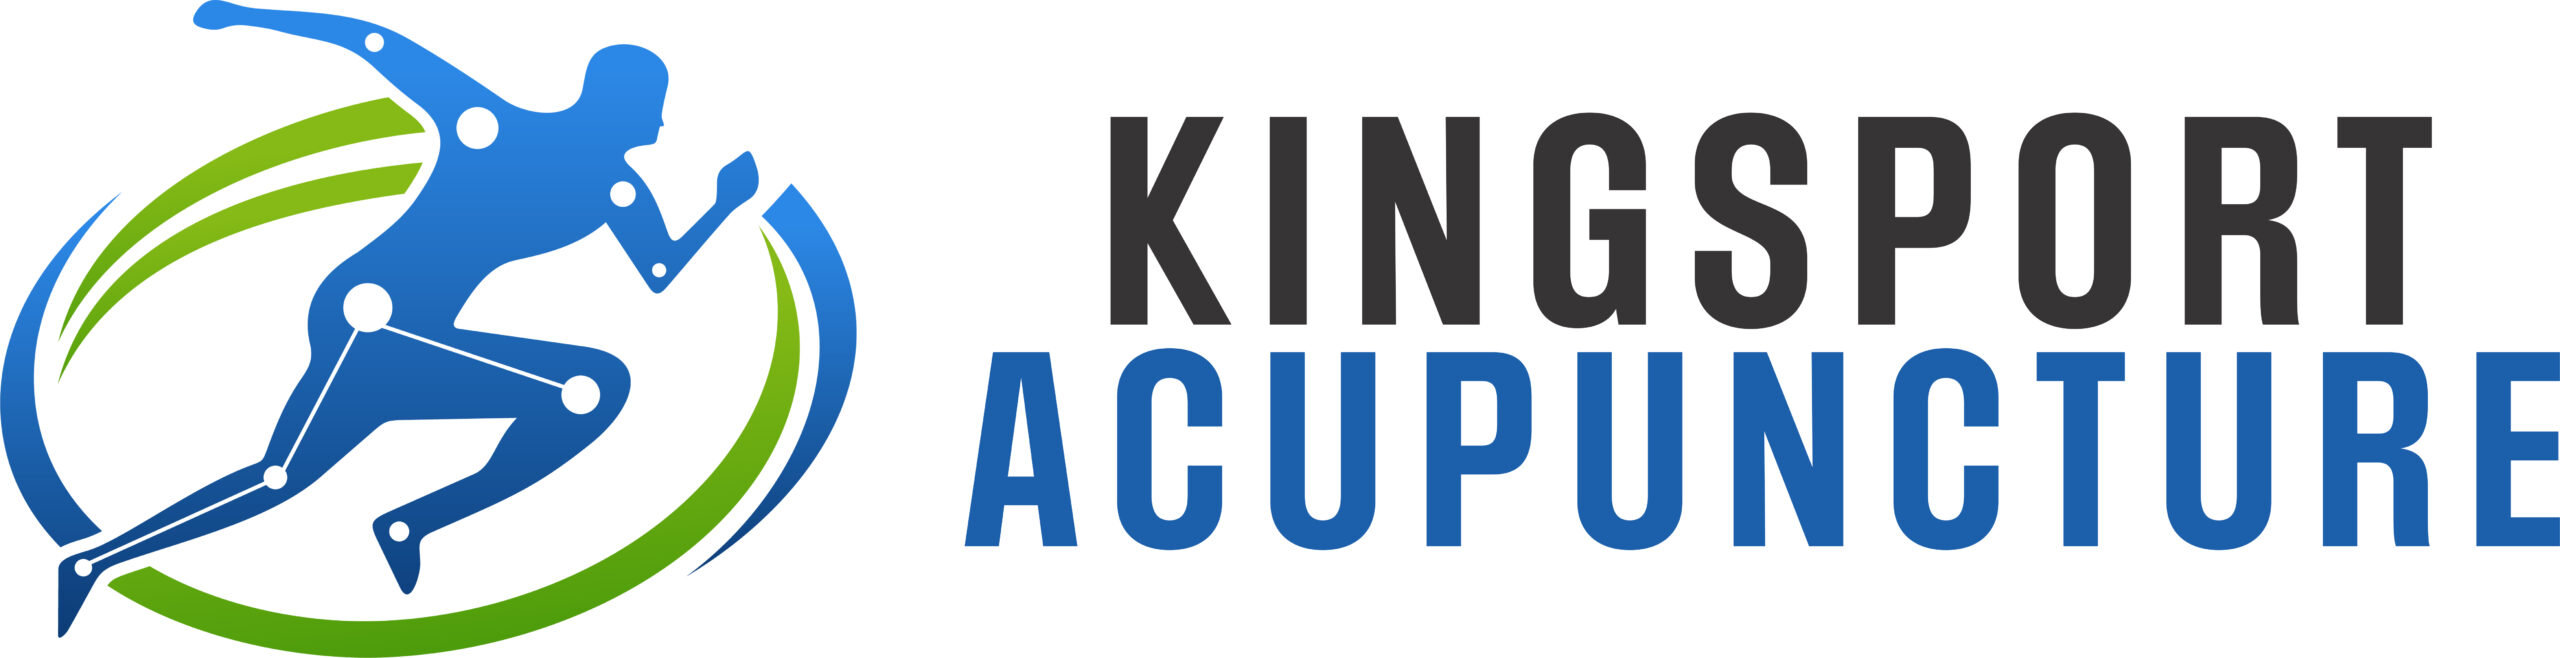 Kingsport Acupuncture